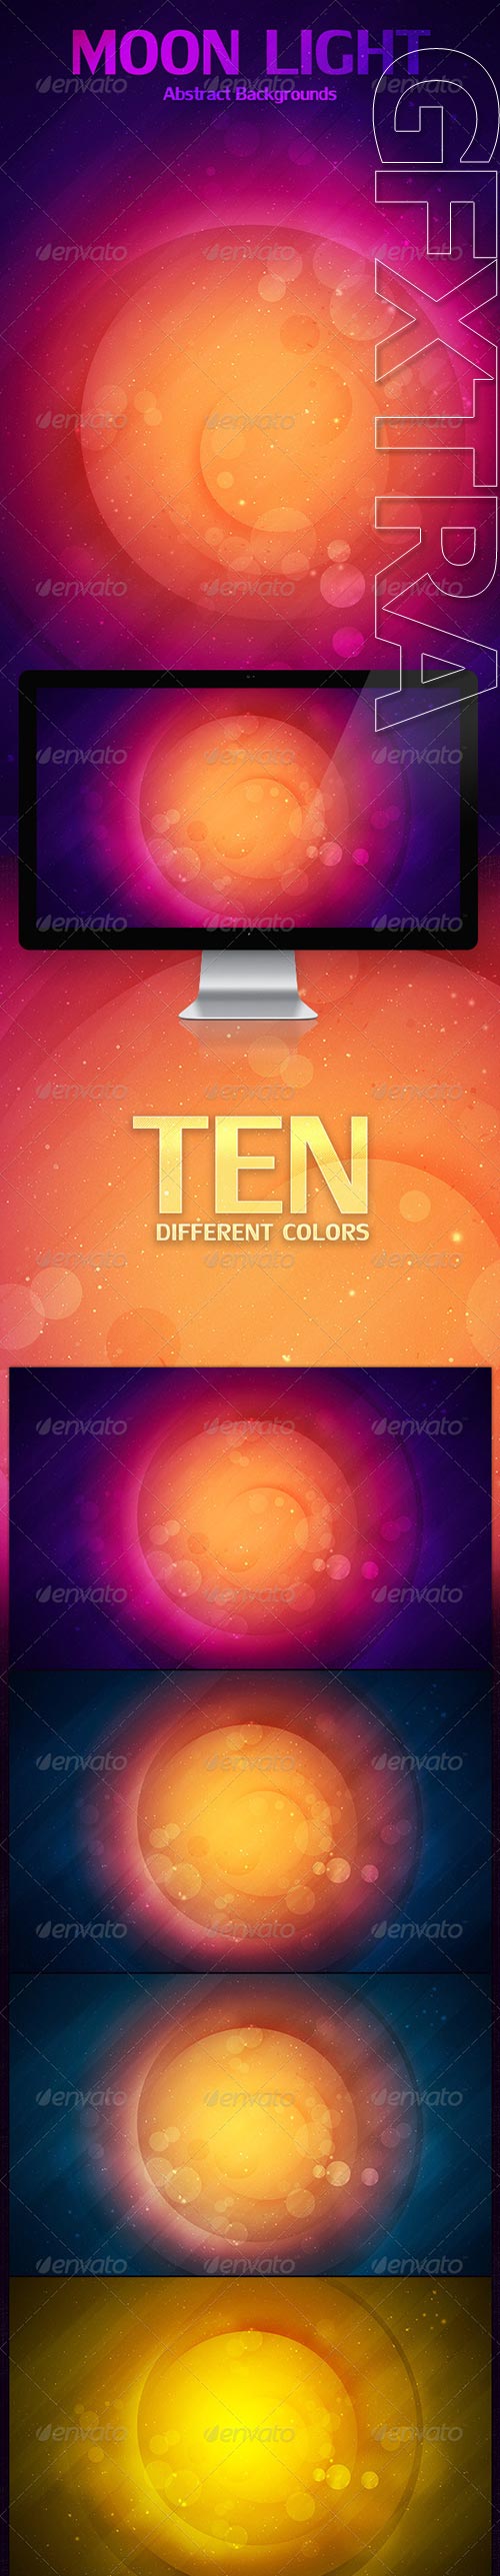 GraphicRiver - Moon Light Abstract Backgrounds